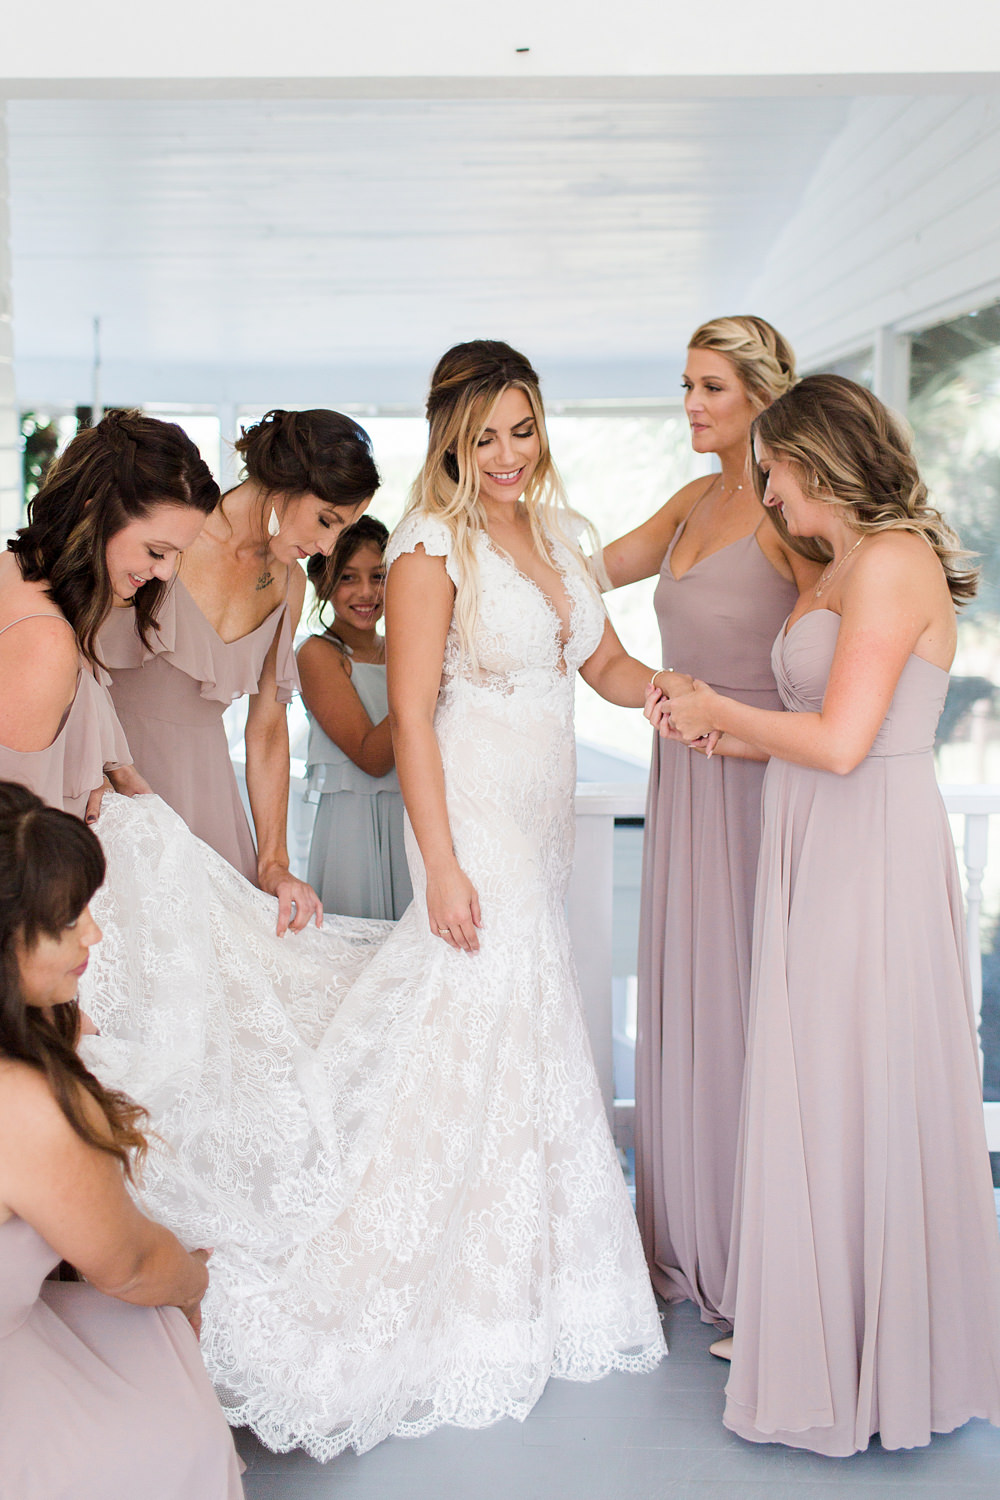 Bridesmaids, wearing mauve, helping the bride get in her dress.